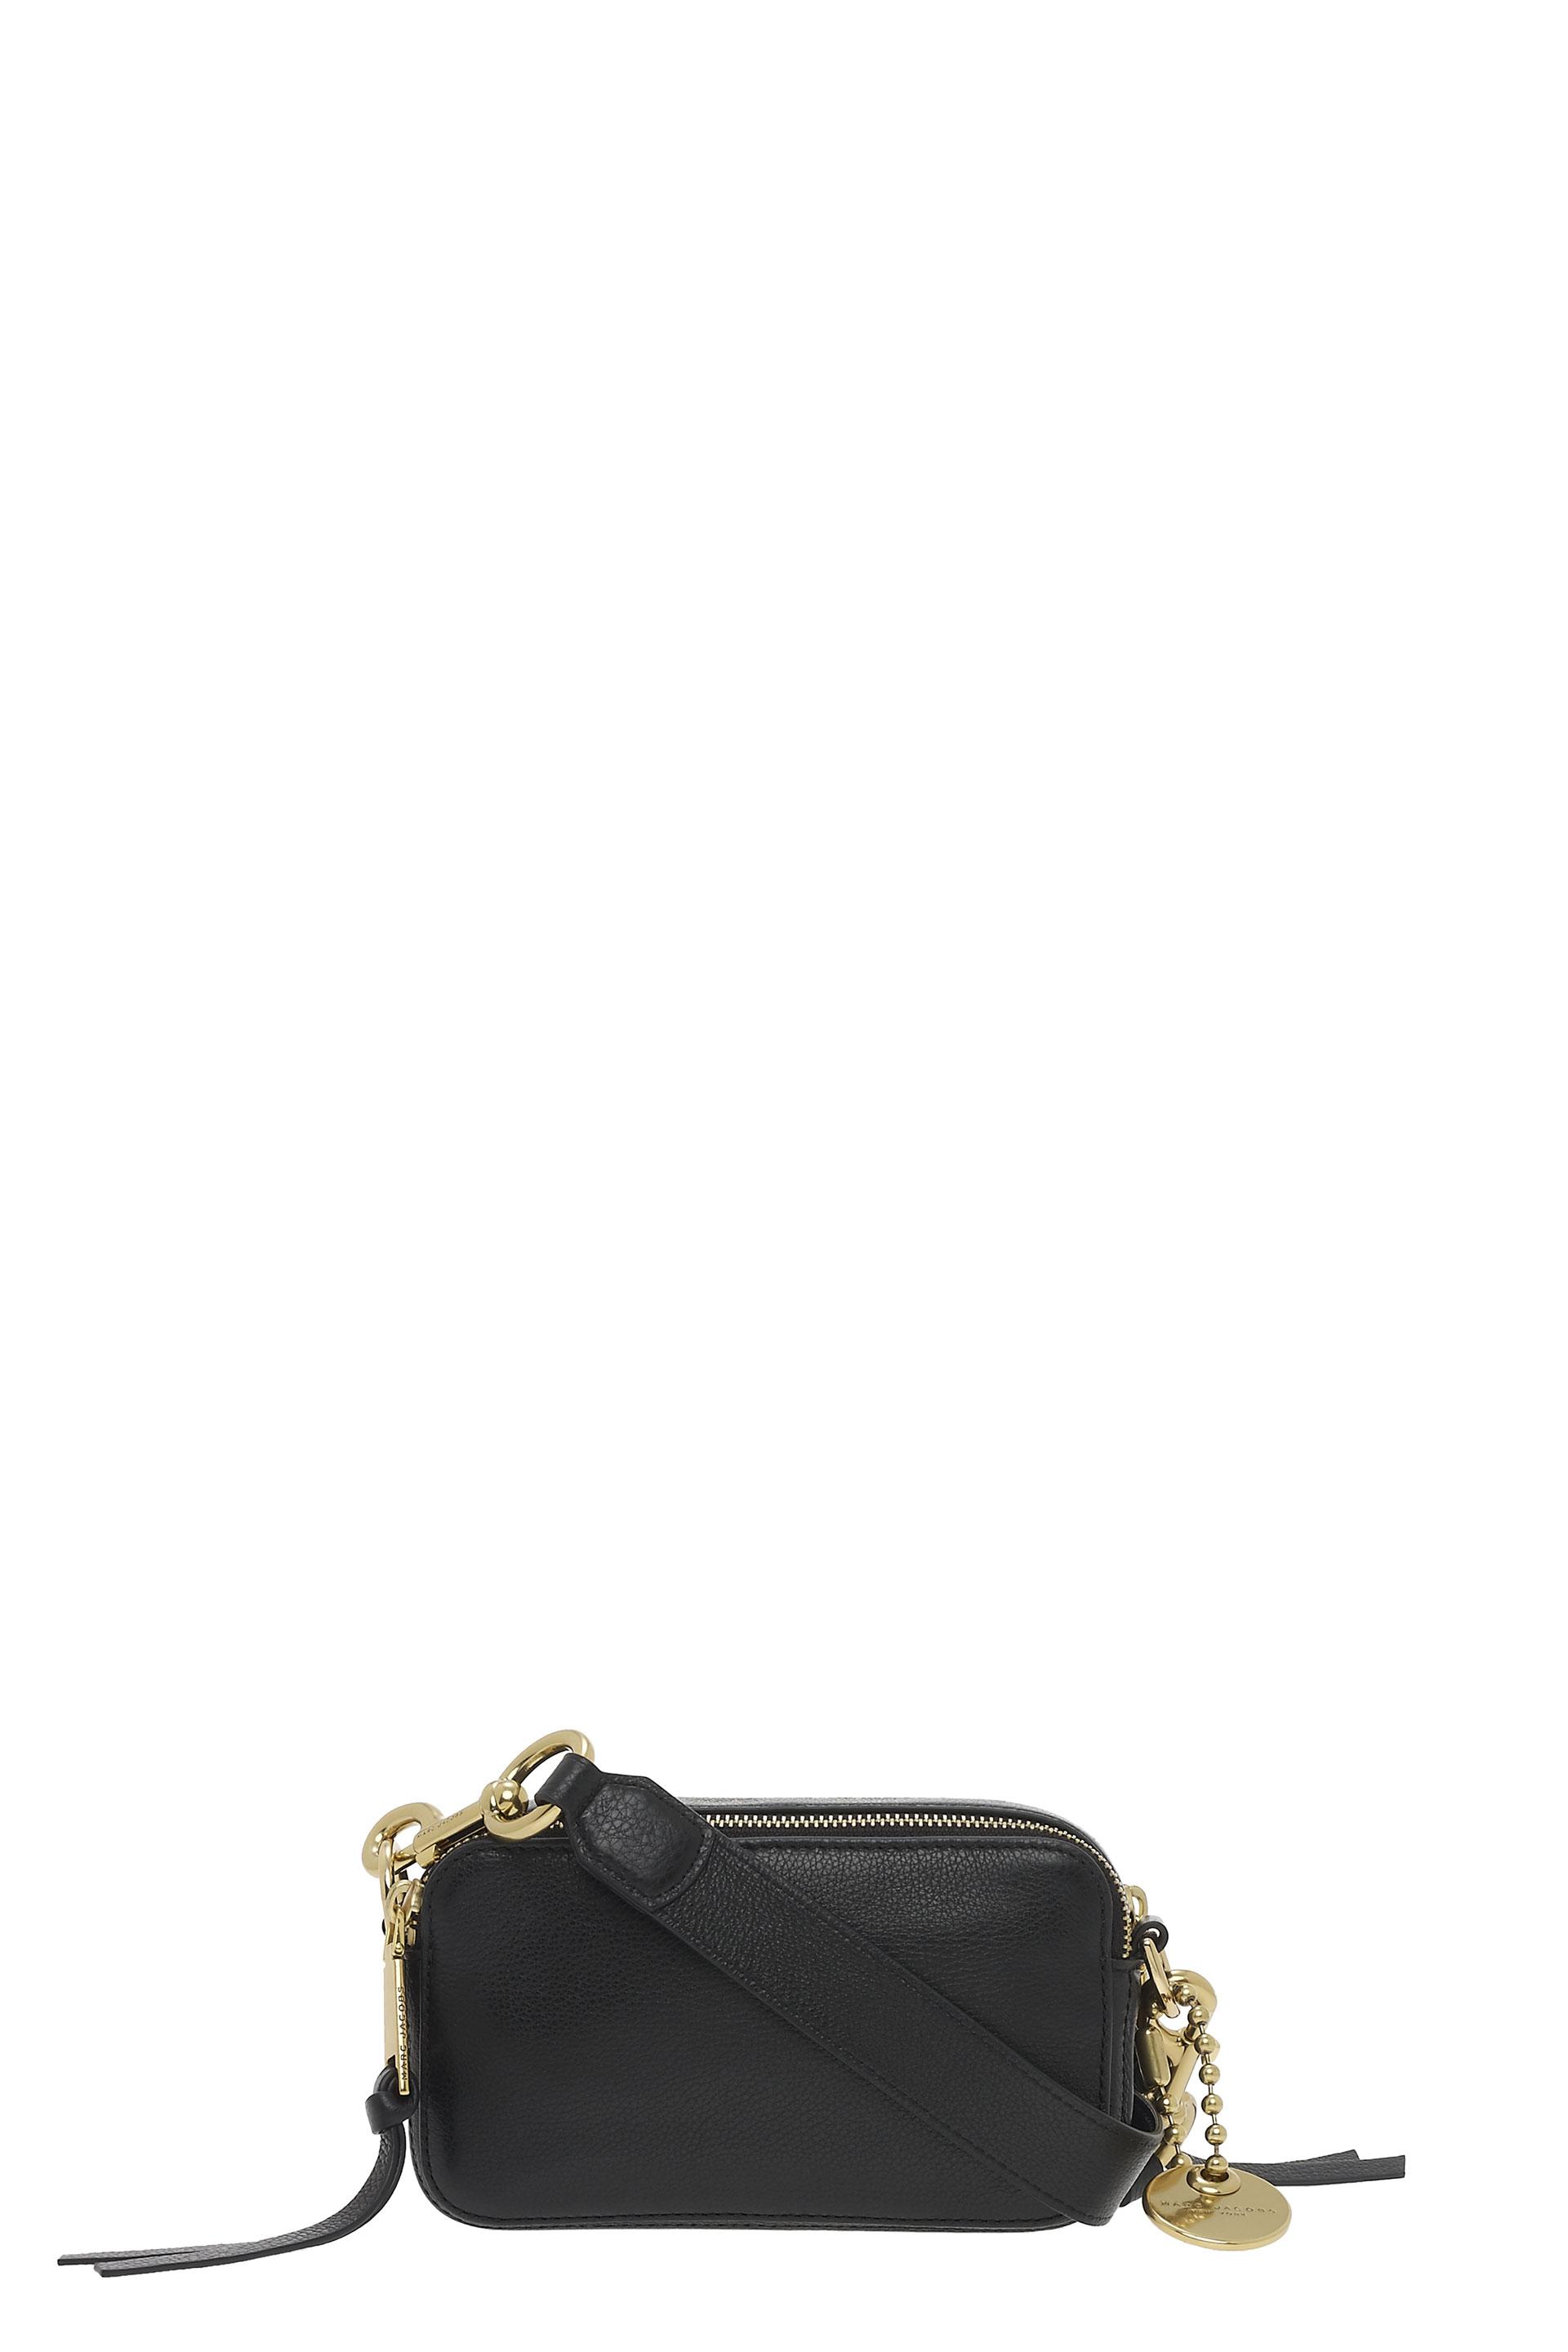 Marc Jacobs 'Recruit' Pebbled Leather Crossbody Bag In Black | ModeSens